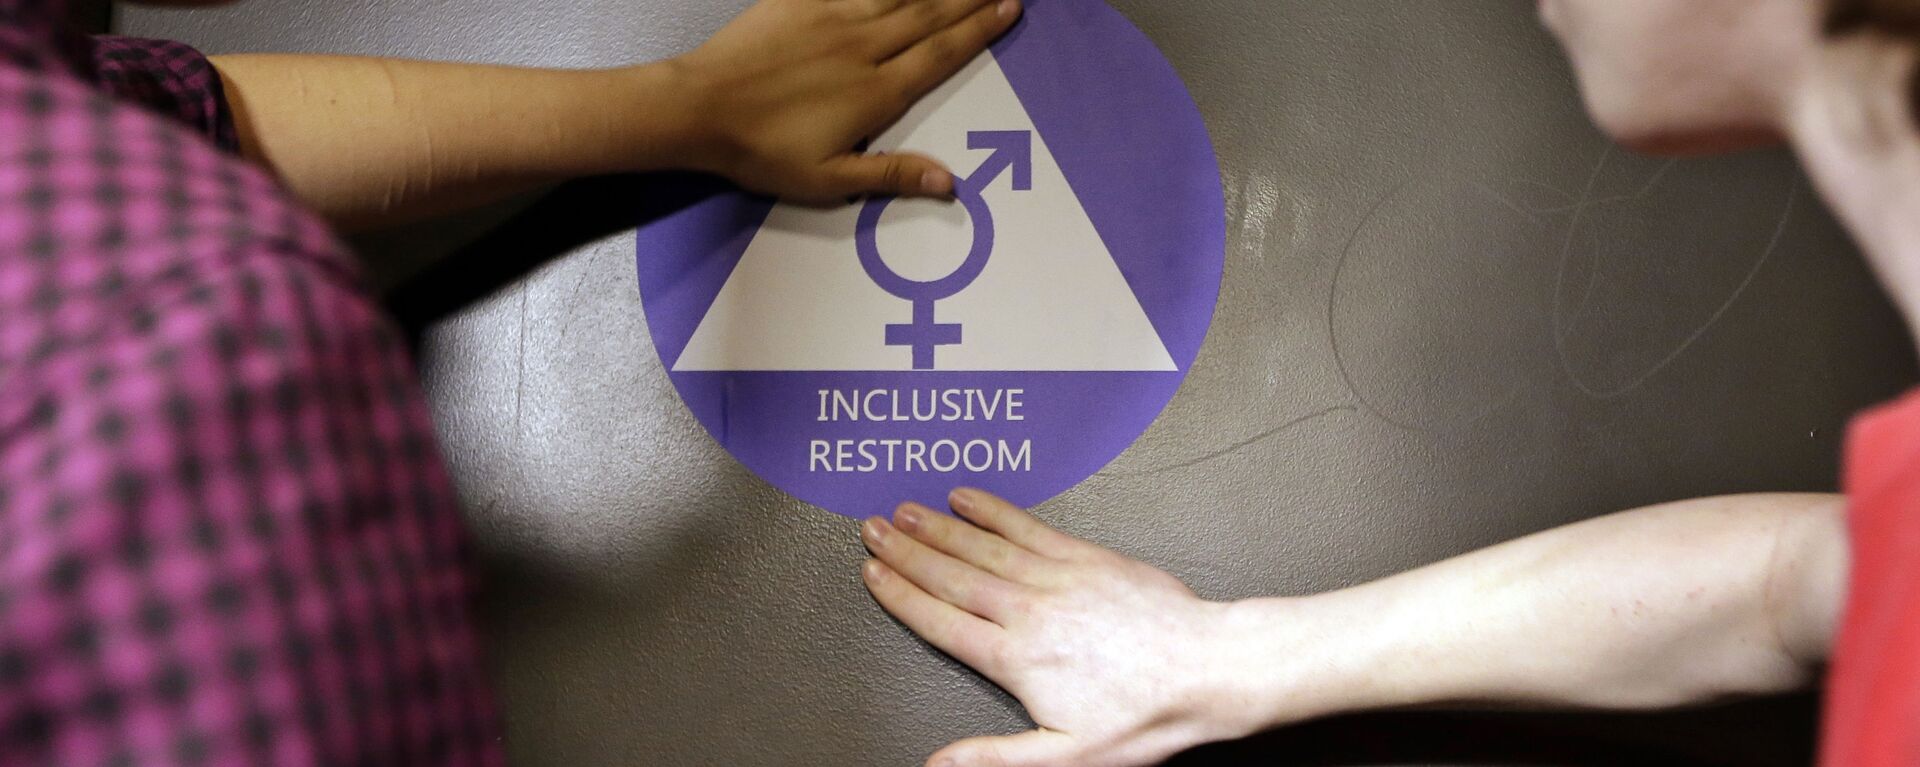 Destin Cramer, left, and Noah Rice place a new sticker on the door at the ceremonial opening of a gender neutral bathroom at Nathan Hale high school Tuesday, May 17, 2016, in Seattle - Sputnik International, 1920, 14.10.2022